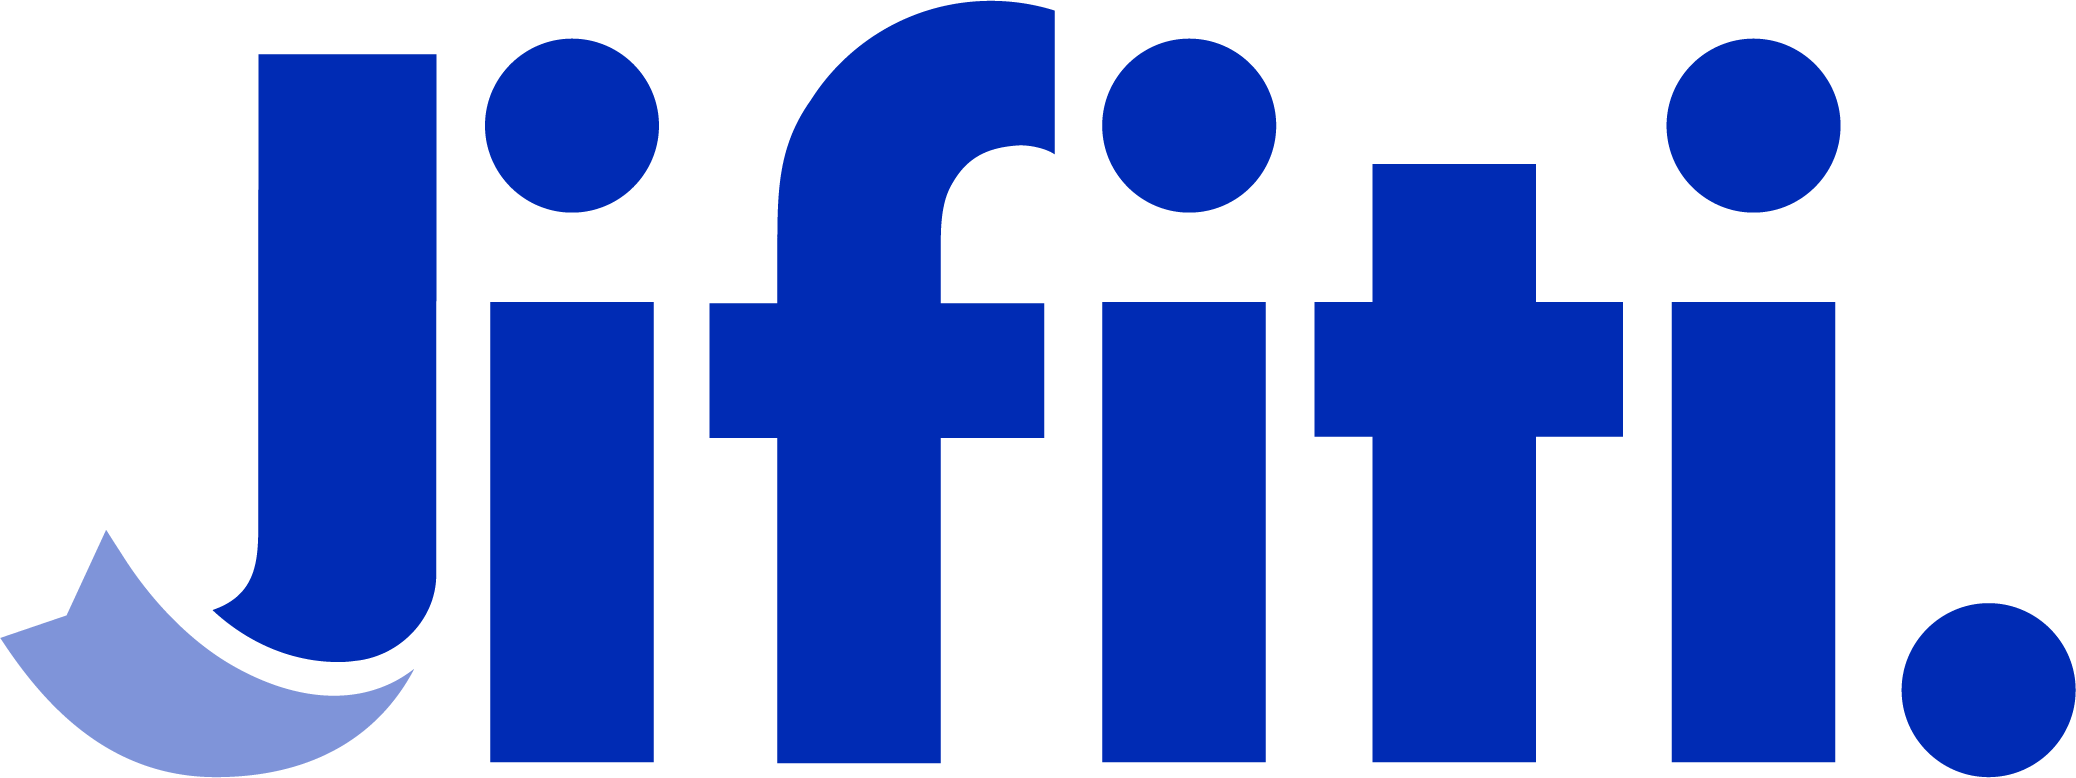 Founded in 2011, Jifiti is a leading fintech company that powers white-labeled BNPL solutions in any global market.